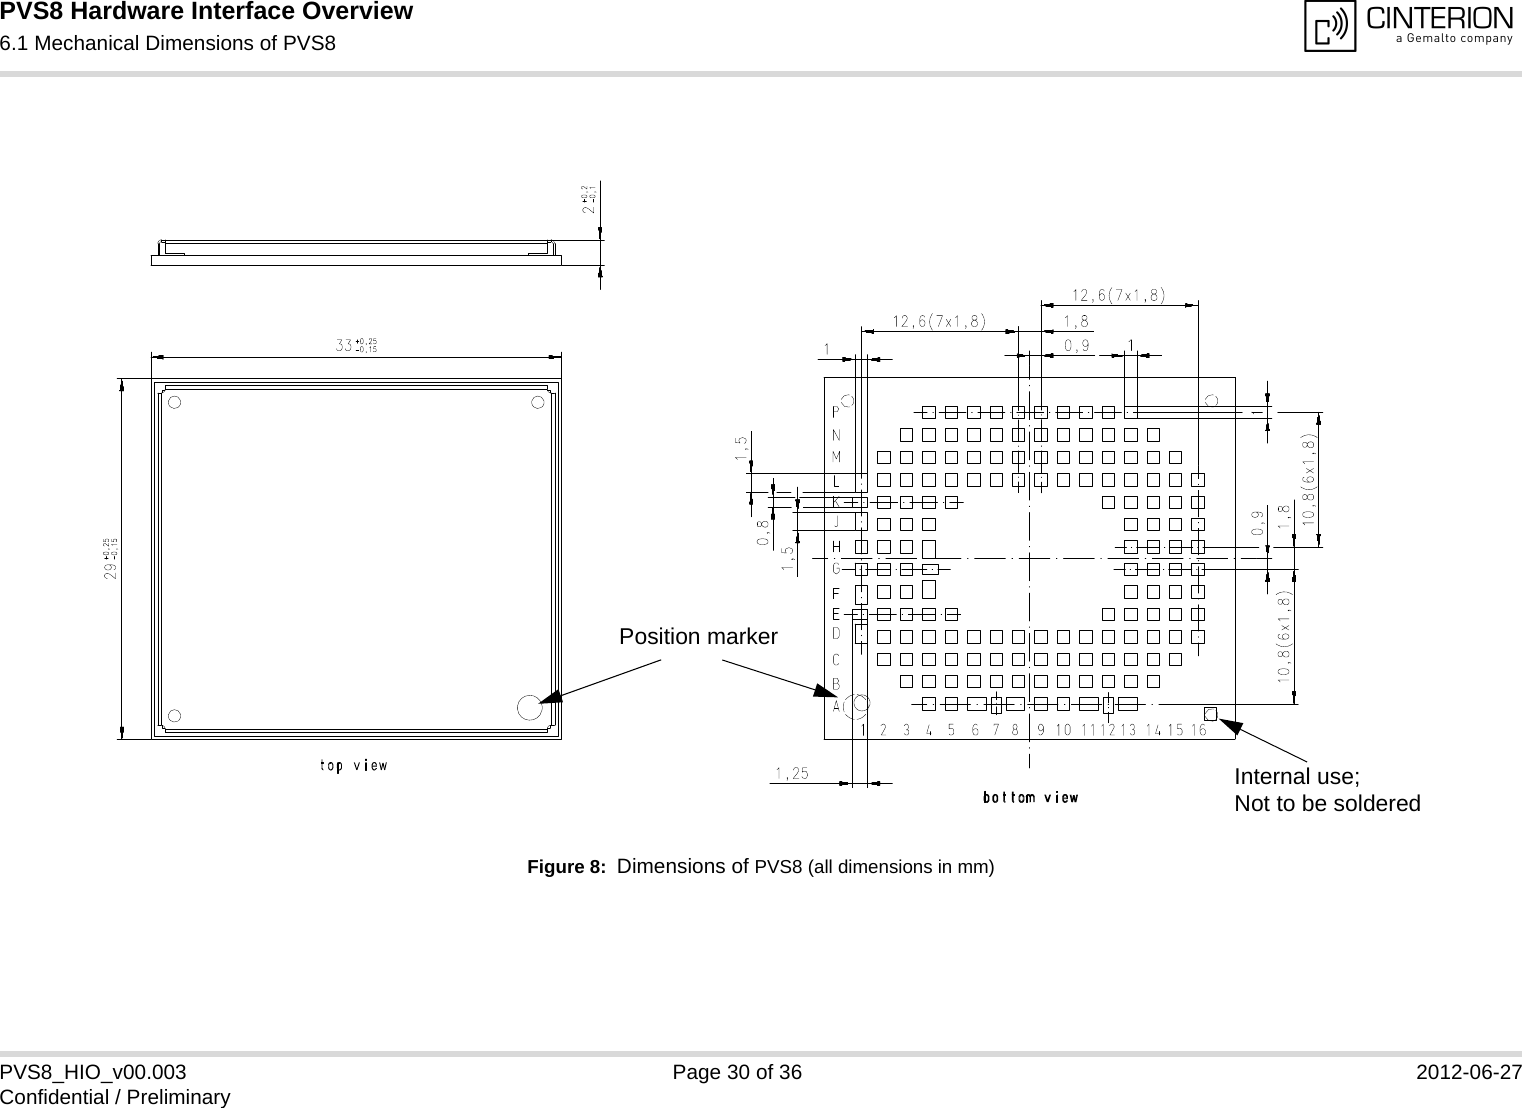 PVS8 Hardware Interface Overview6.1 Mechanical Dimensions of PVS830PVS8_HIO_v00.003 Page 30 of 36 2012-06-27Confidential / PreliminaryFigure 8:  Dimensions of PVS8 (all dimensions in mm)Internal use; Not to be solderedPosition marker